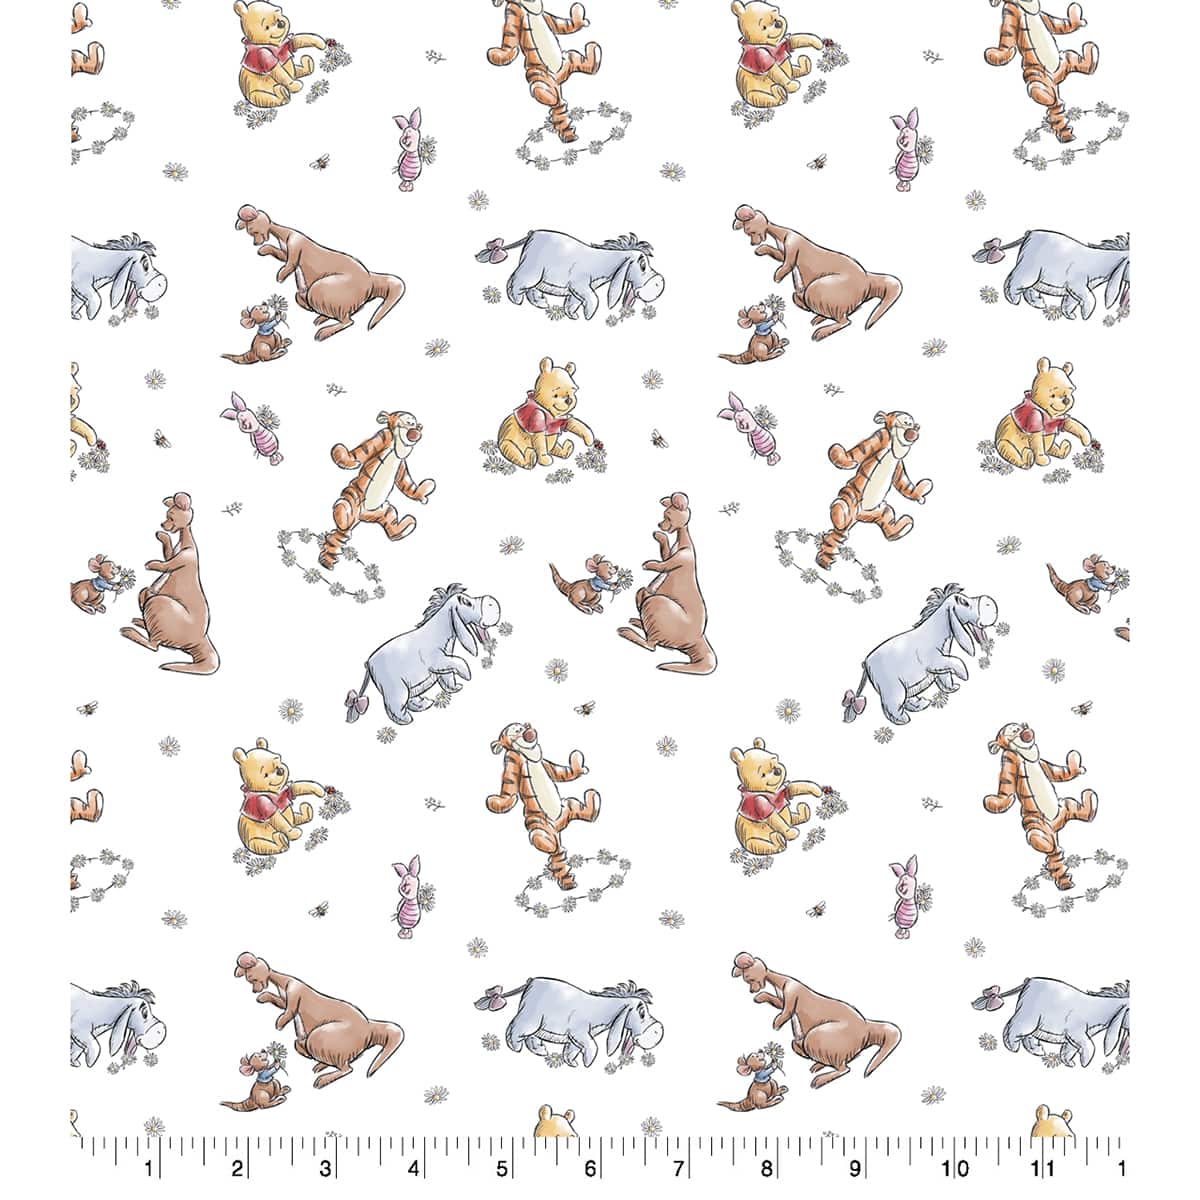 Shop Winnie-the-Pooh Fabrics for Crafts & Sewing Projects